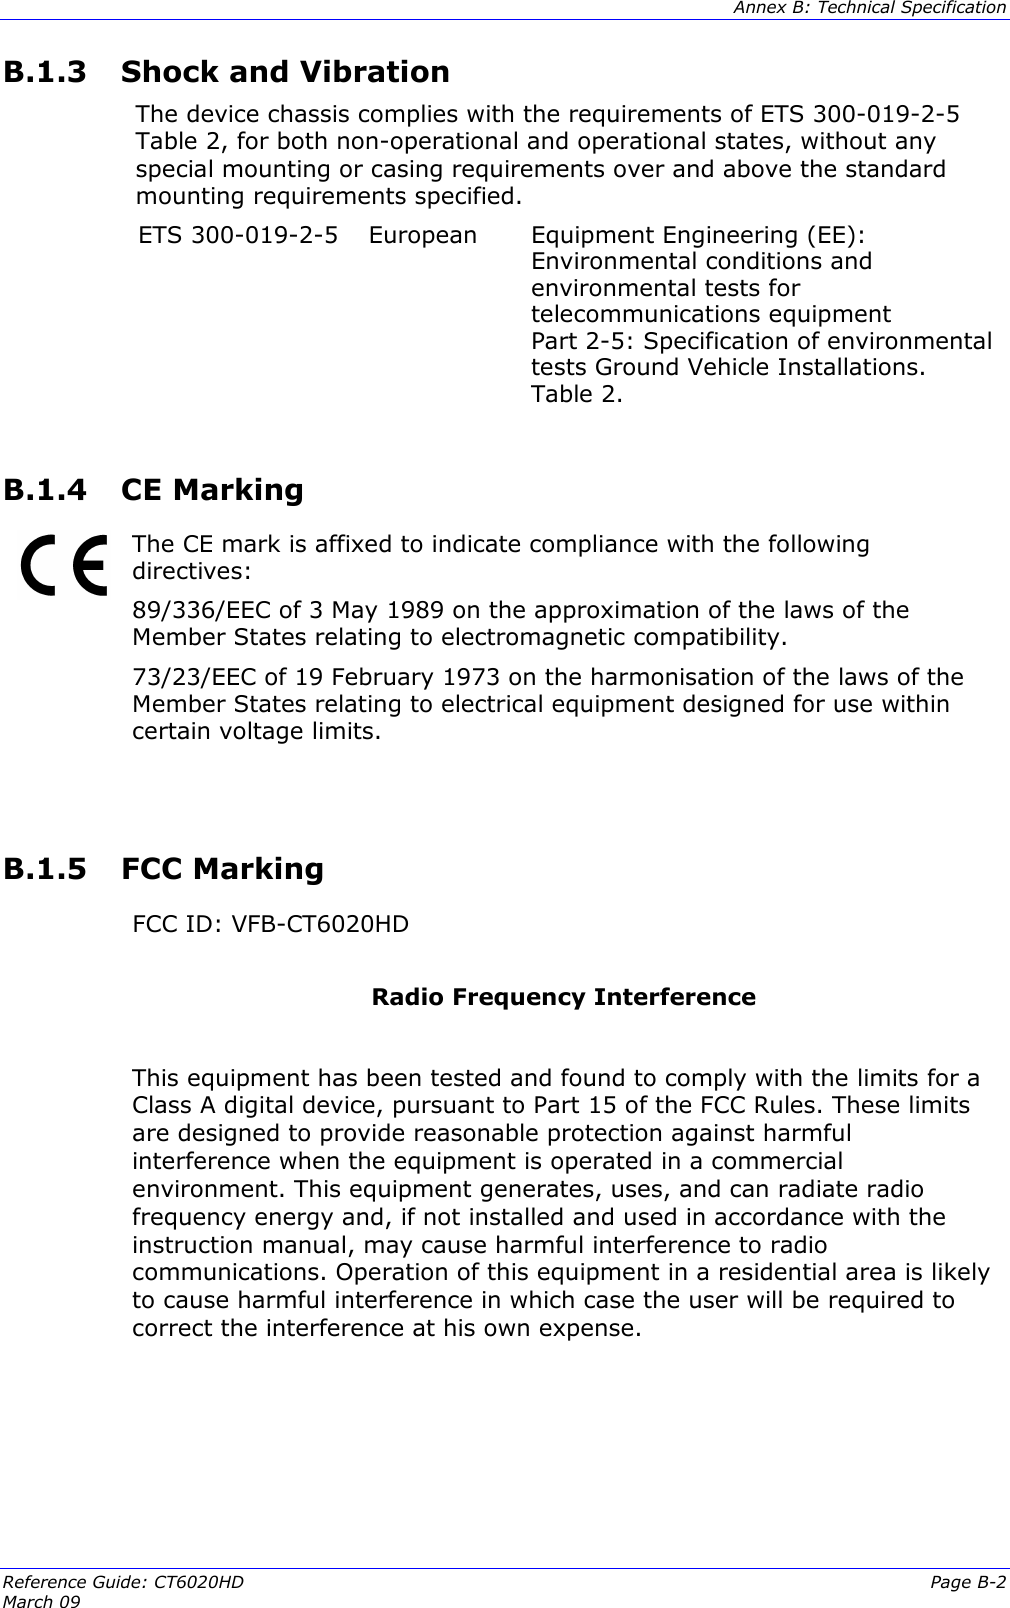  Annex B: Technical Specification  Reference Guide: CT6020HD  Page B-2 March 09   B.1.3  Shock and Vibration The device chassis complies with the requirements of ETS 300-019-2-5 Table 2, for both non-operational and operational states, without any special mounting or casing requirements over and above the standard mounting requirements specified. ETS 300-019-2-5  European  Equipment Engineering (EE): Environmental conditions and environmental tests for telecommunications equipment Part 2-5: Specification of environmental tests Ground Vehicle Installations. Table 2.  B.1.4  CE Marking   The CE mark is affixed to indicate compliance with the following directives:  89/336/EEC of 3 May 1989 on the approximation of the laws of the Member States relating to electromagnetic compatibility. 73/23/EEC of 19 February 1973 on the harmonisation of the laws of the Member States relating to electrical equipment designed for use within certain voltage limits.   B.1.5  FCC Marking    FCC ID: VFB-CT6020HD  Radio Frequency Interference   This equipment has been tested and found to comply with the limits for a Class A digital device, pursuant to Part 15 of the FCC Rules. These limits are designed to provide reasonable protection against harmful interference when the equipment is operated in a commercial environment. This equipment generates, uses, and can radiate radio frequency energy and, if not installed and used in accordance with the instruction manual, may cause harmful interference to radio communications. Operation of this equipment in a residential area is likely to cause harmful interference in which case the user will be required to correct the interference at his own expense.      